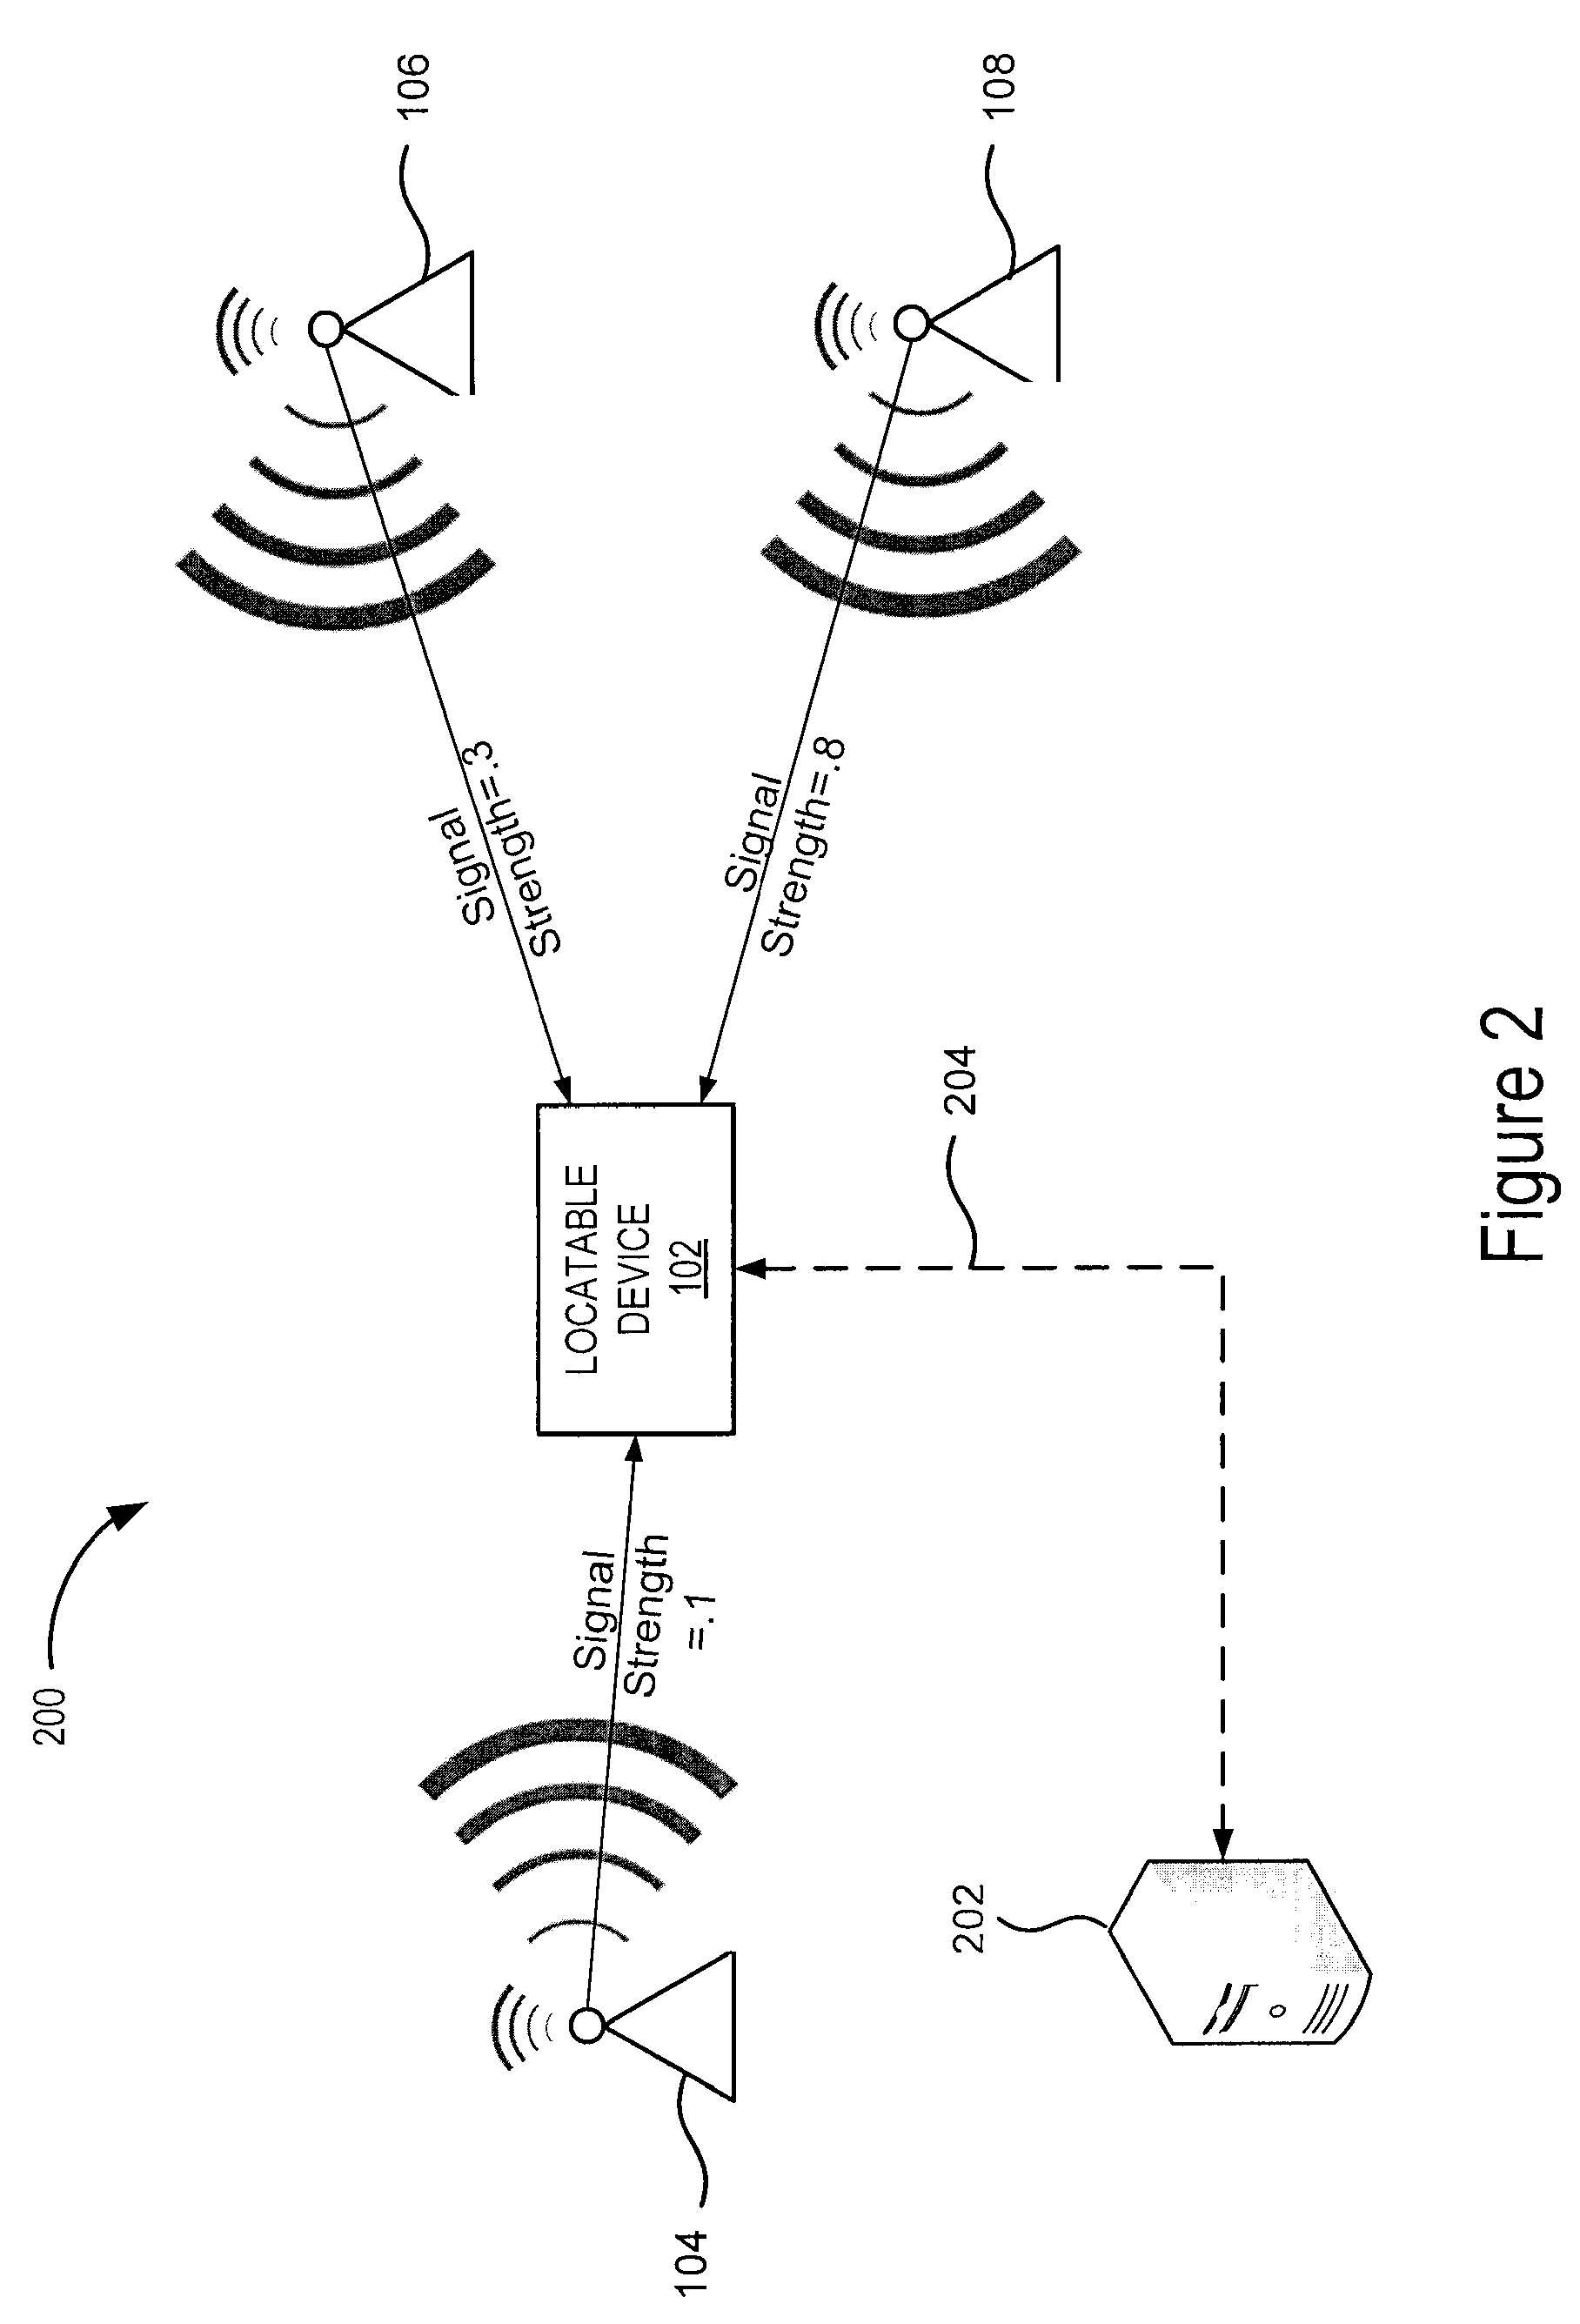 Applications for geographically coded access points